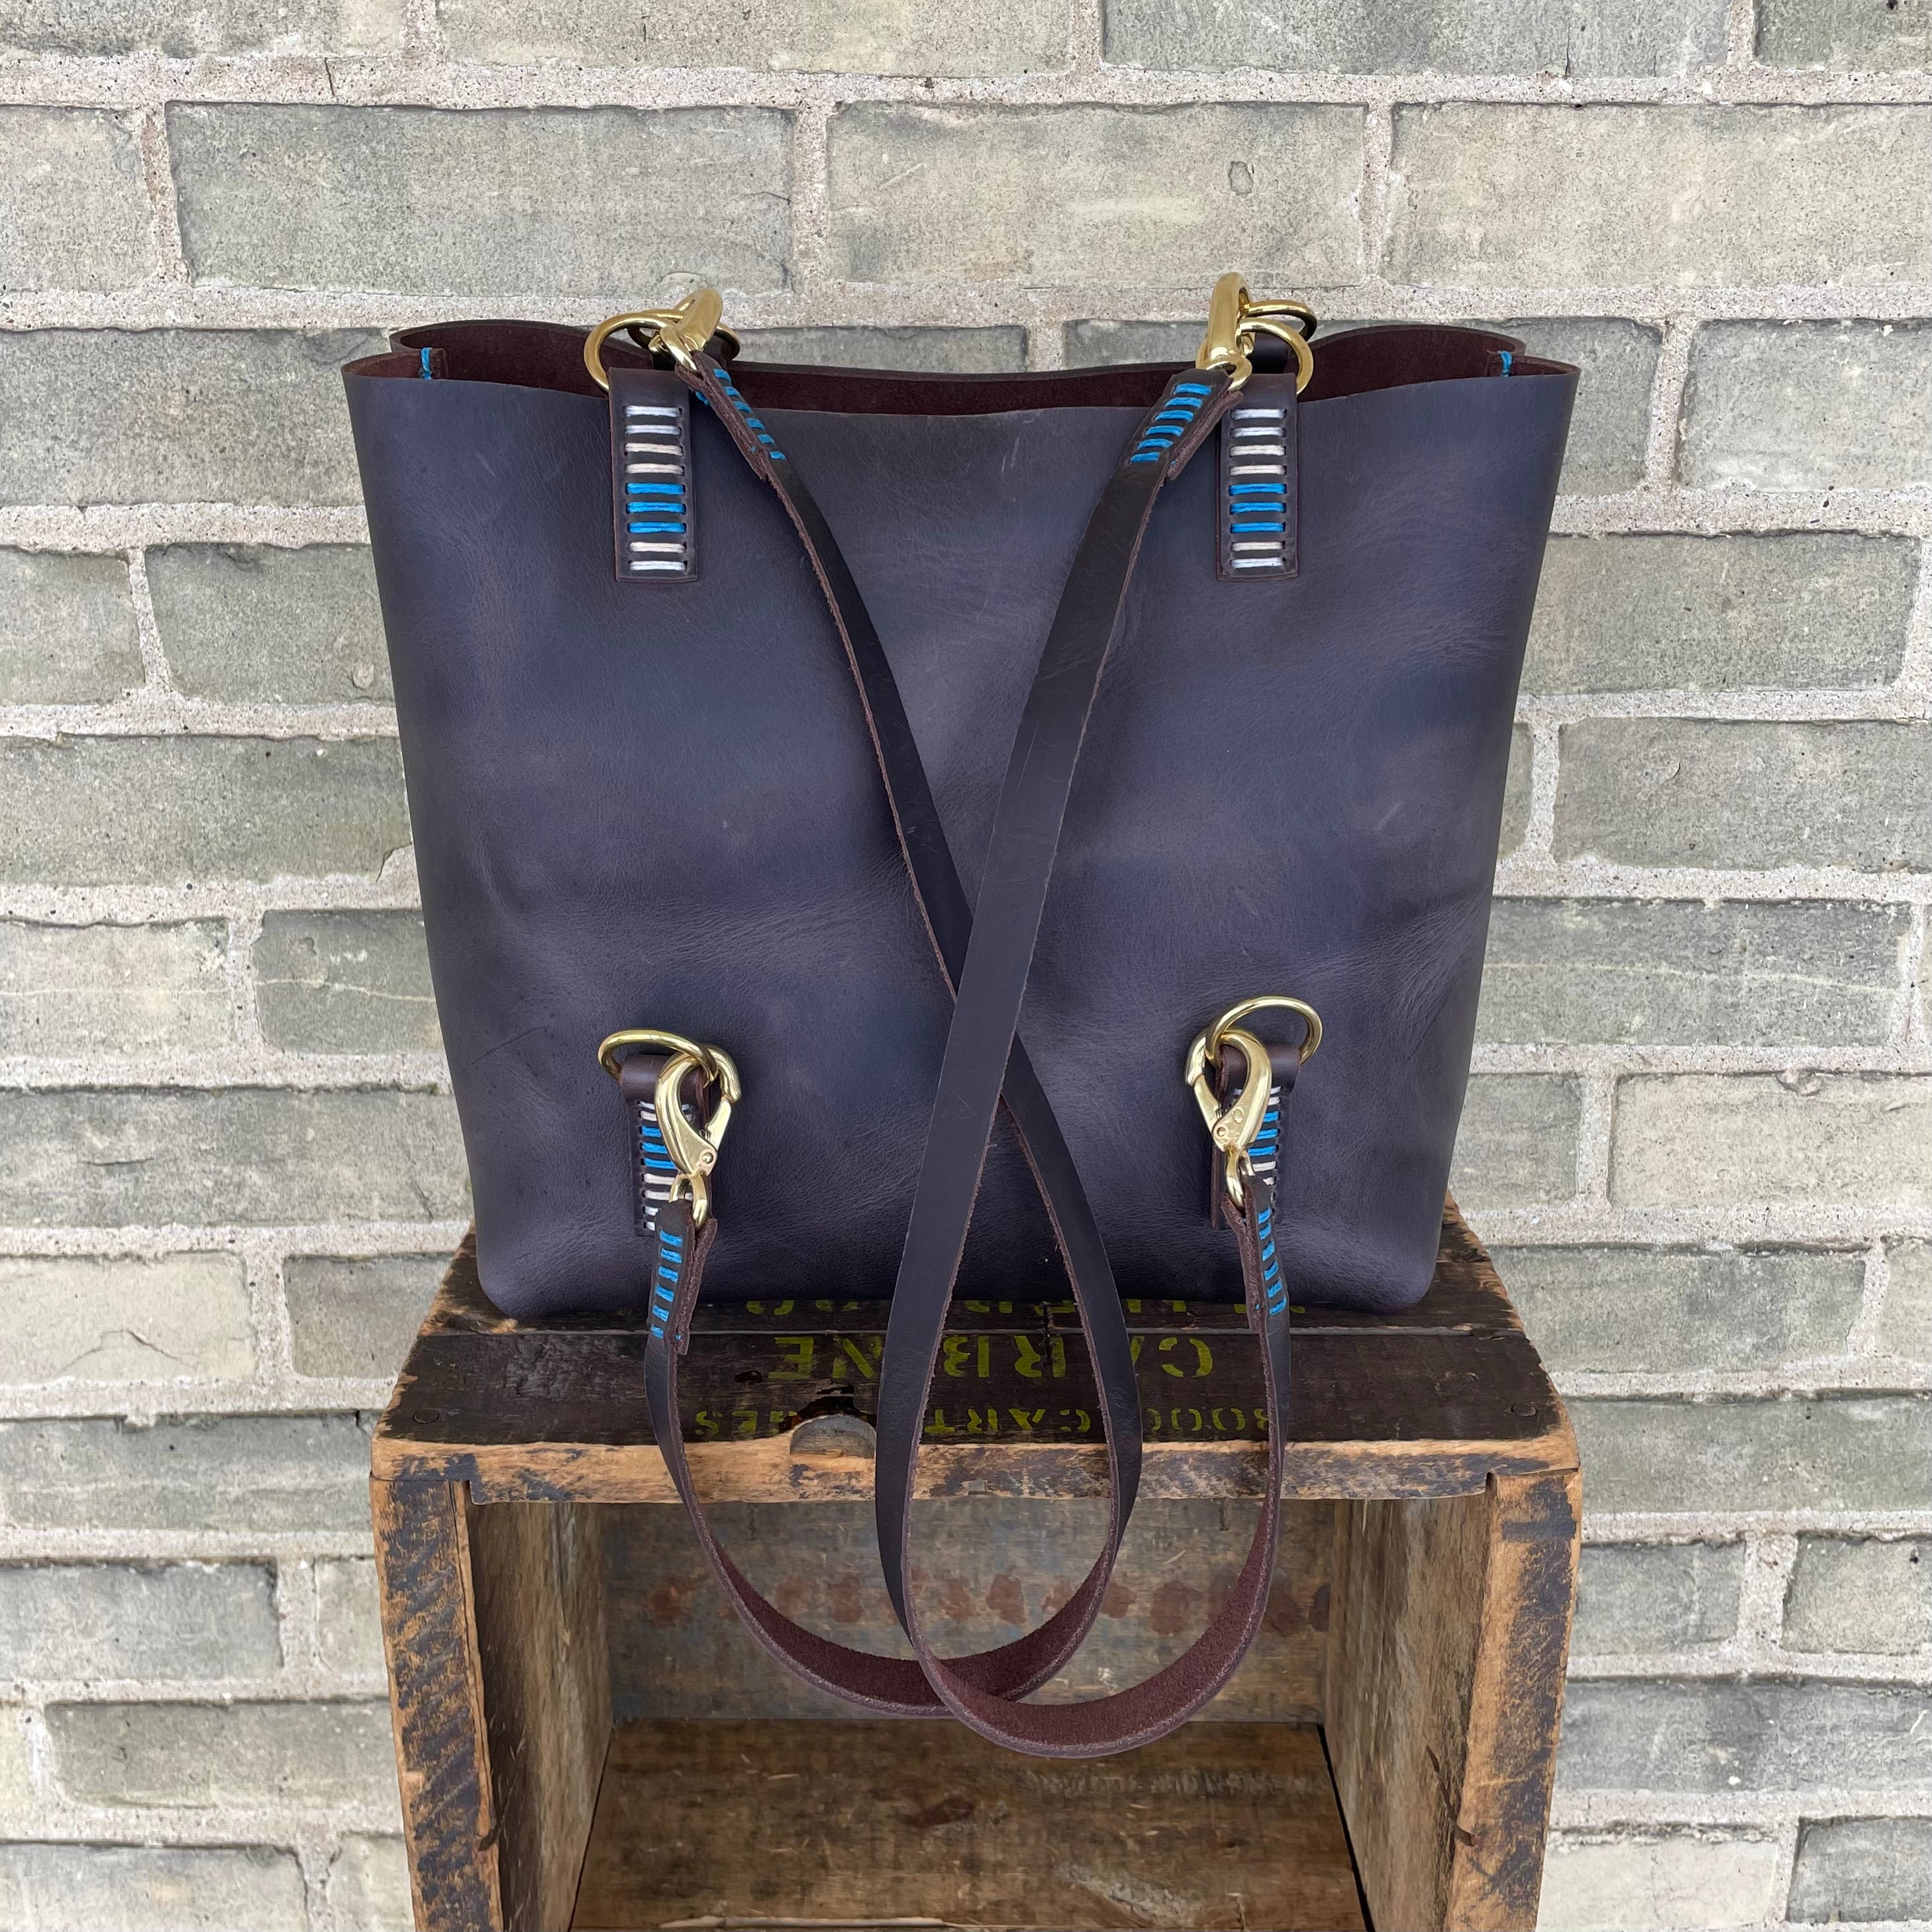 Branded Leather Backpack Tote